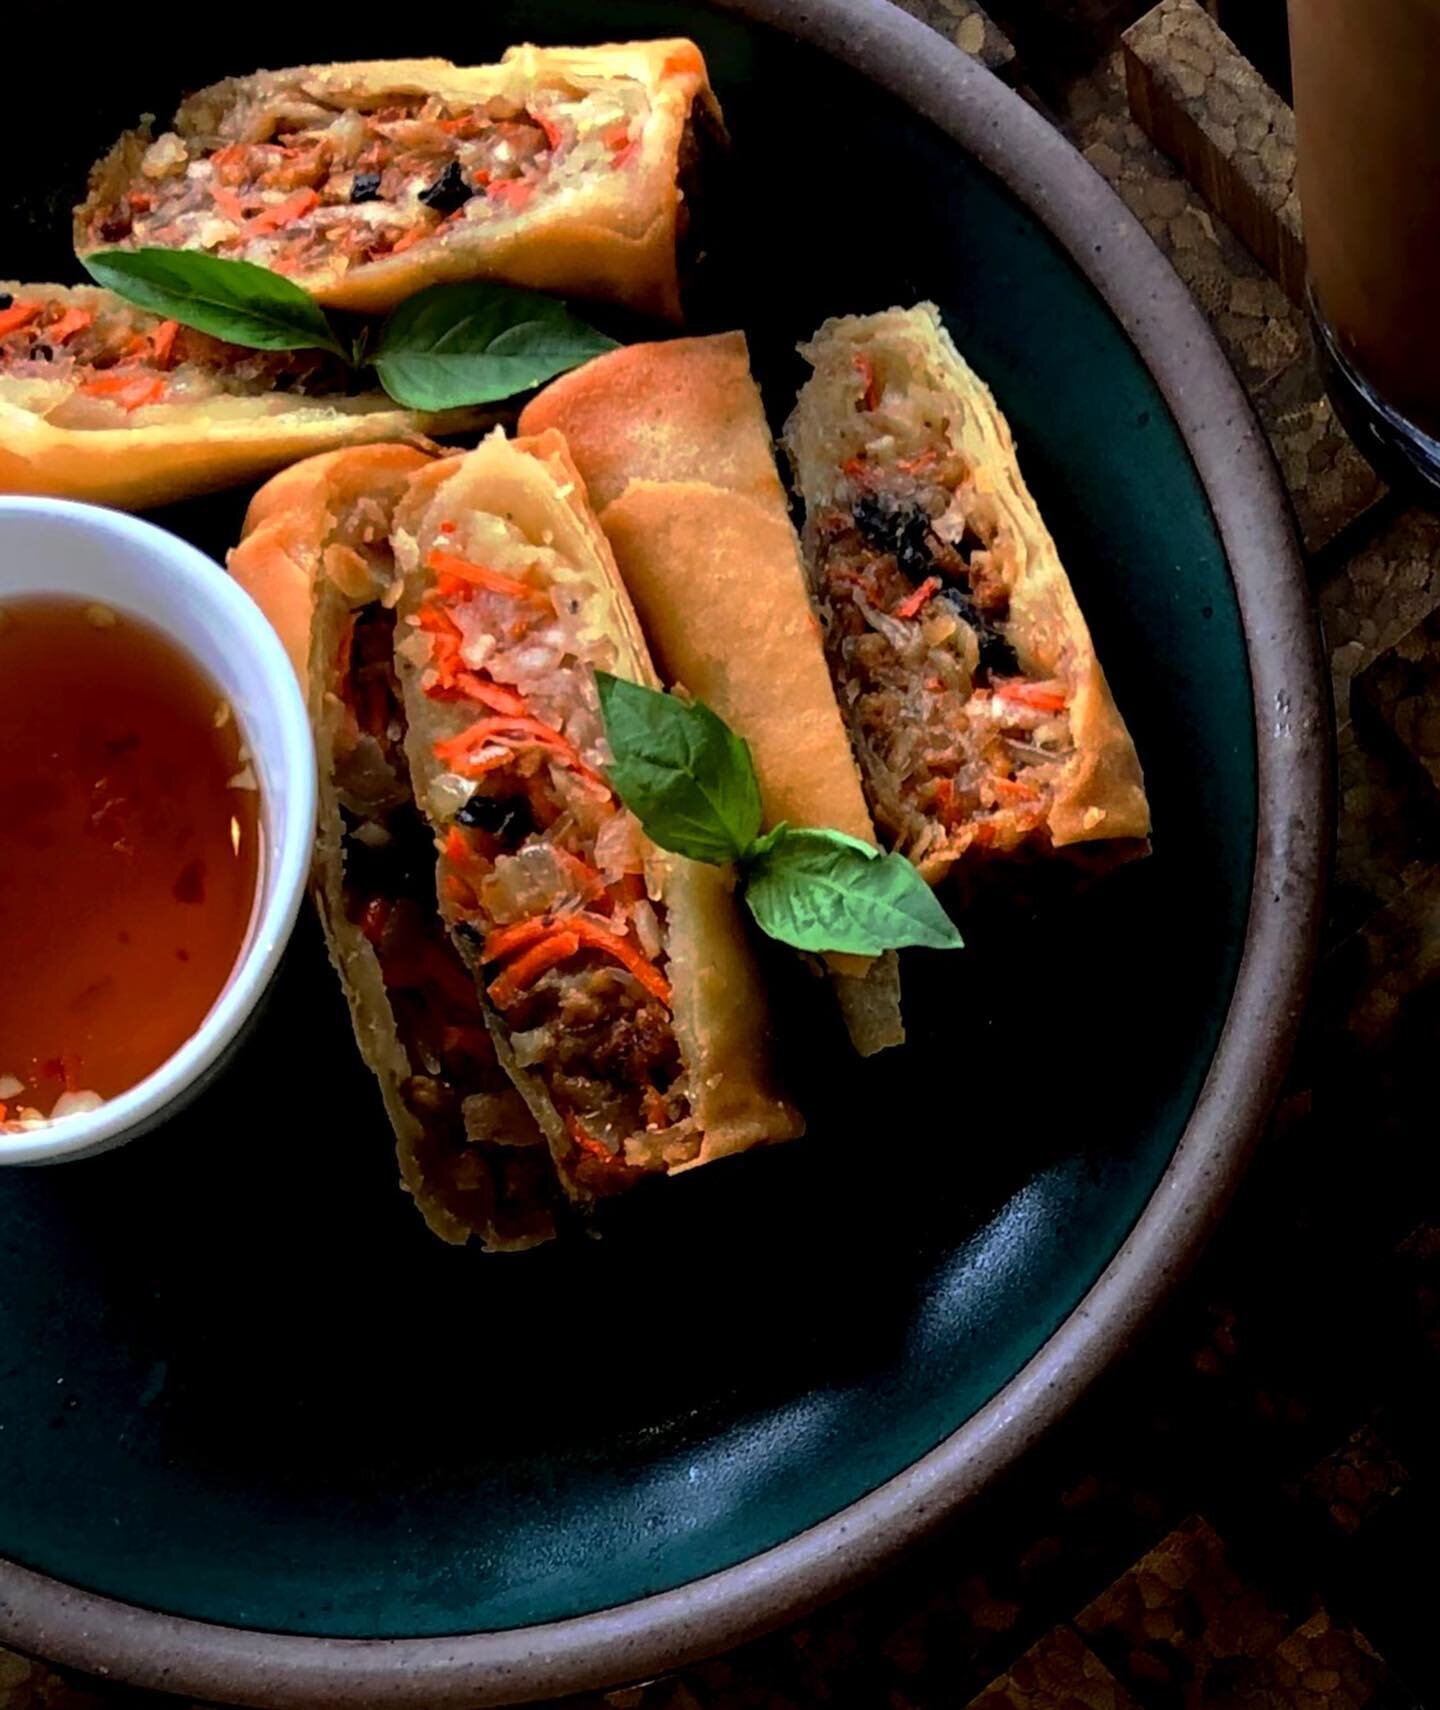 Filled with carrot, taro, vegan ground meat, onion, wood-ear mushroom, and all individually hand-rolled. ❤️ Swipe to see some behind the scenes of our spring rolls 👉🏼